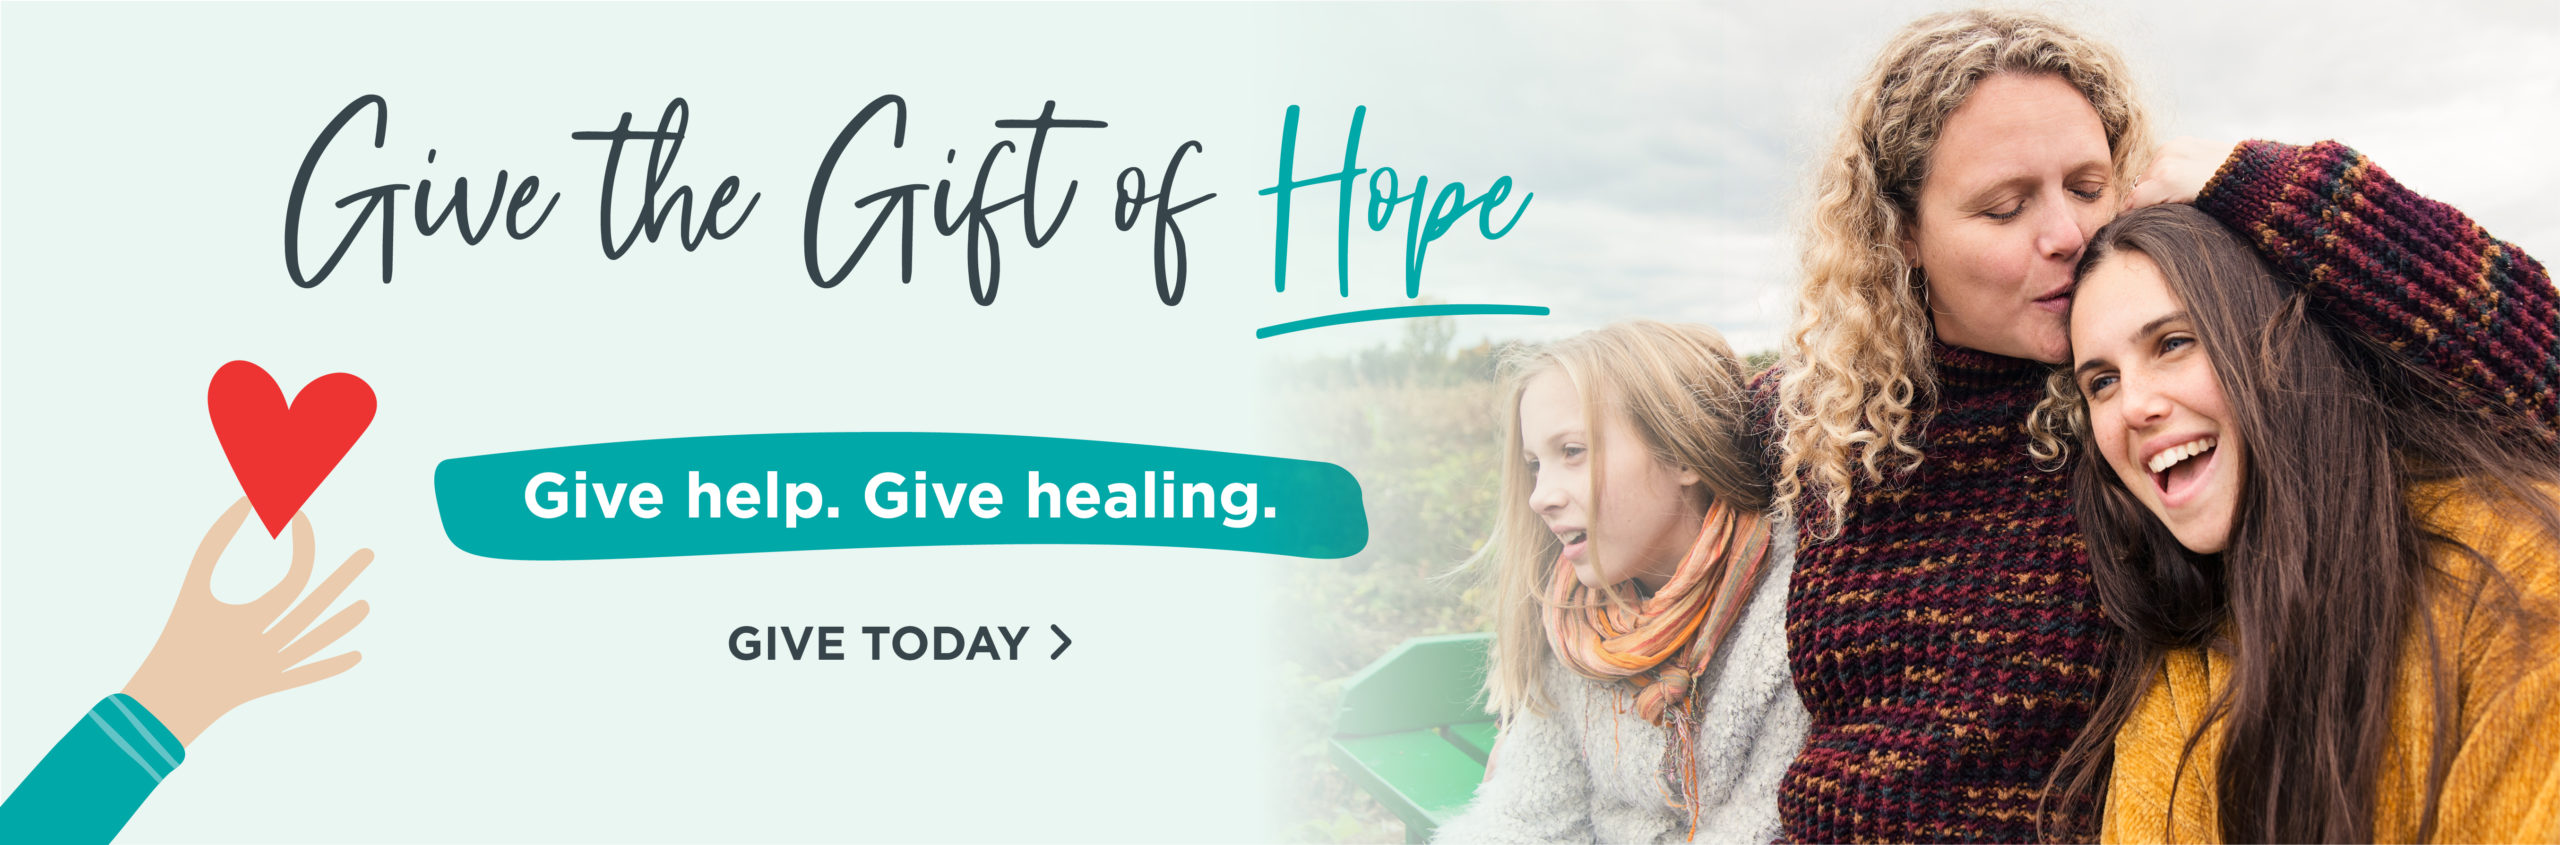 Gift of Hope Web Banner 1300x429